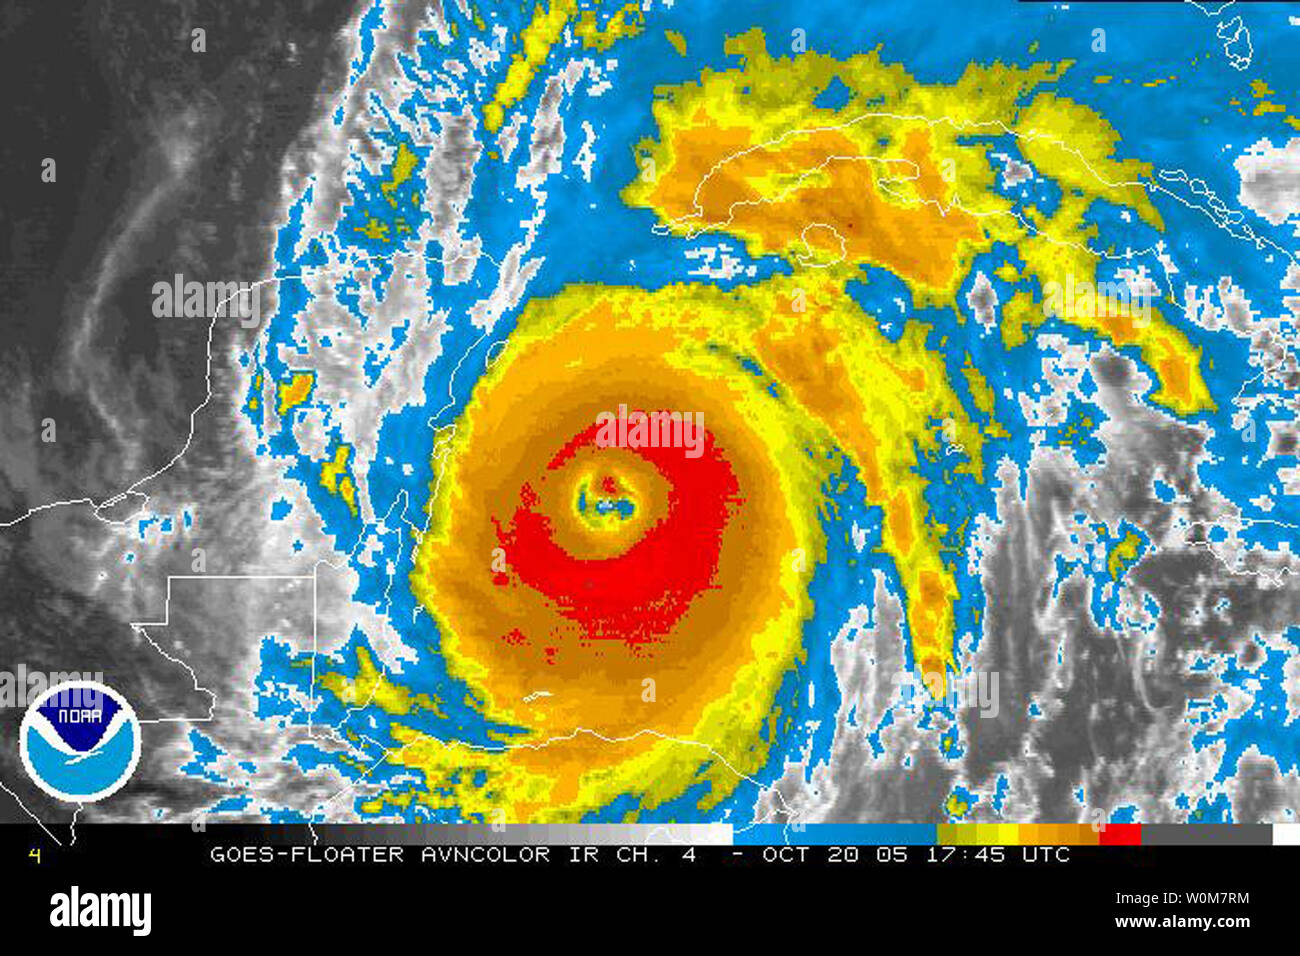 Hurricane Wilma moves through the Carribean Sea in this infrared satellite image supplied by NOAA on October 20, 2005. Wilma became the most intense hurricane recorded in the Atlantic Basin on Wednesday with a minimum central pressure of 882 millibars. The hurricane is forecast to lose some strength before a weekend landfall currently projected to be along the west coast of Florida.   (UPI Photo/NOAA) Stock Photo